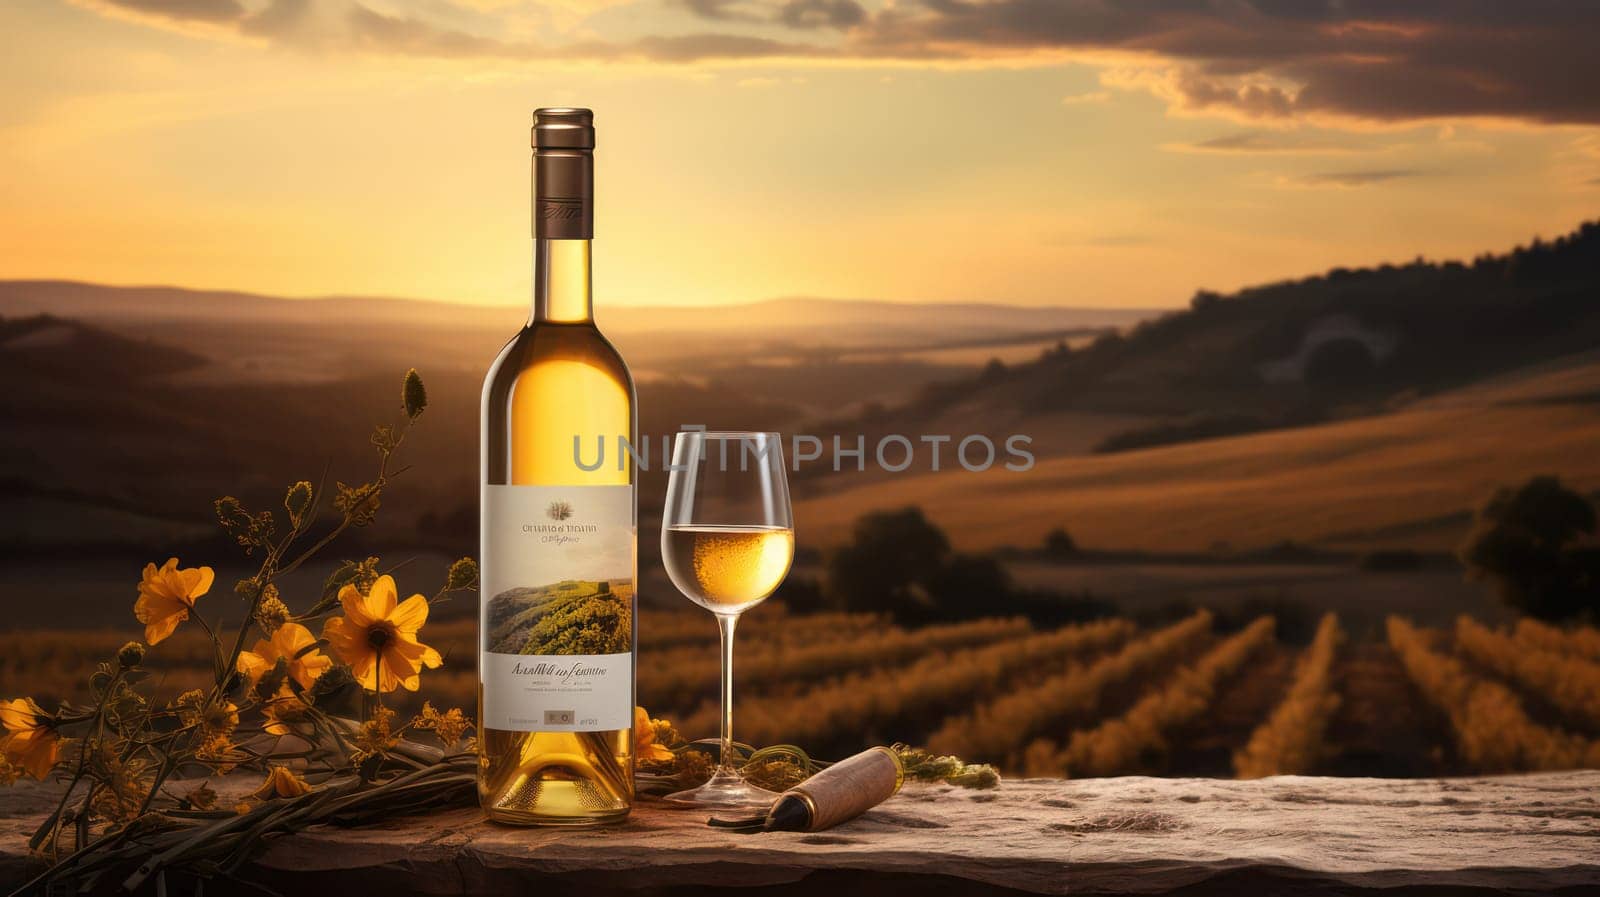 Romantic Wine Tasting in the Italian Countryside: A Still Life of Wine Bottles, Glasses, and Cheese, Surrounded by Lush Autumn Vineyards, with a Breathtaking Sunset over the Valley and Hills. by Vichizh